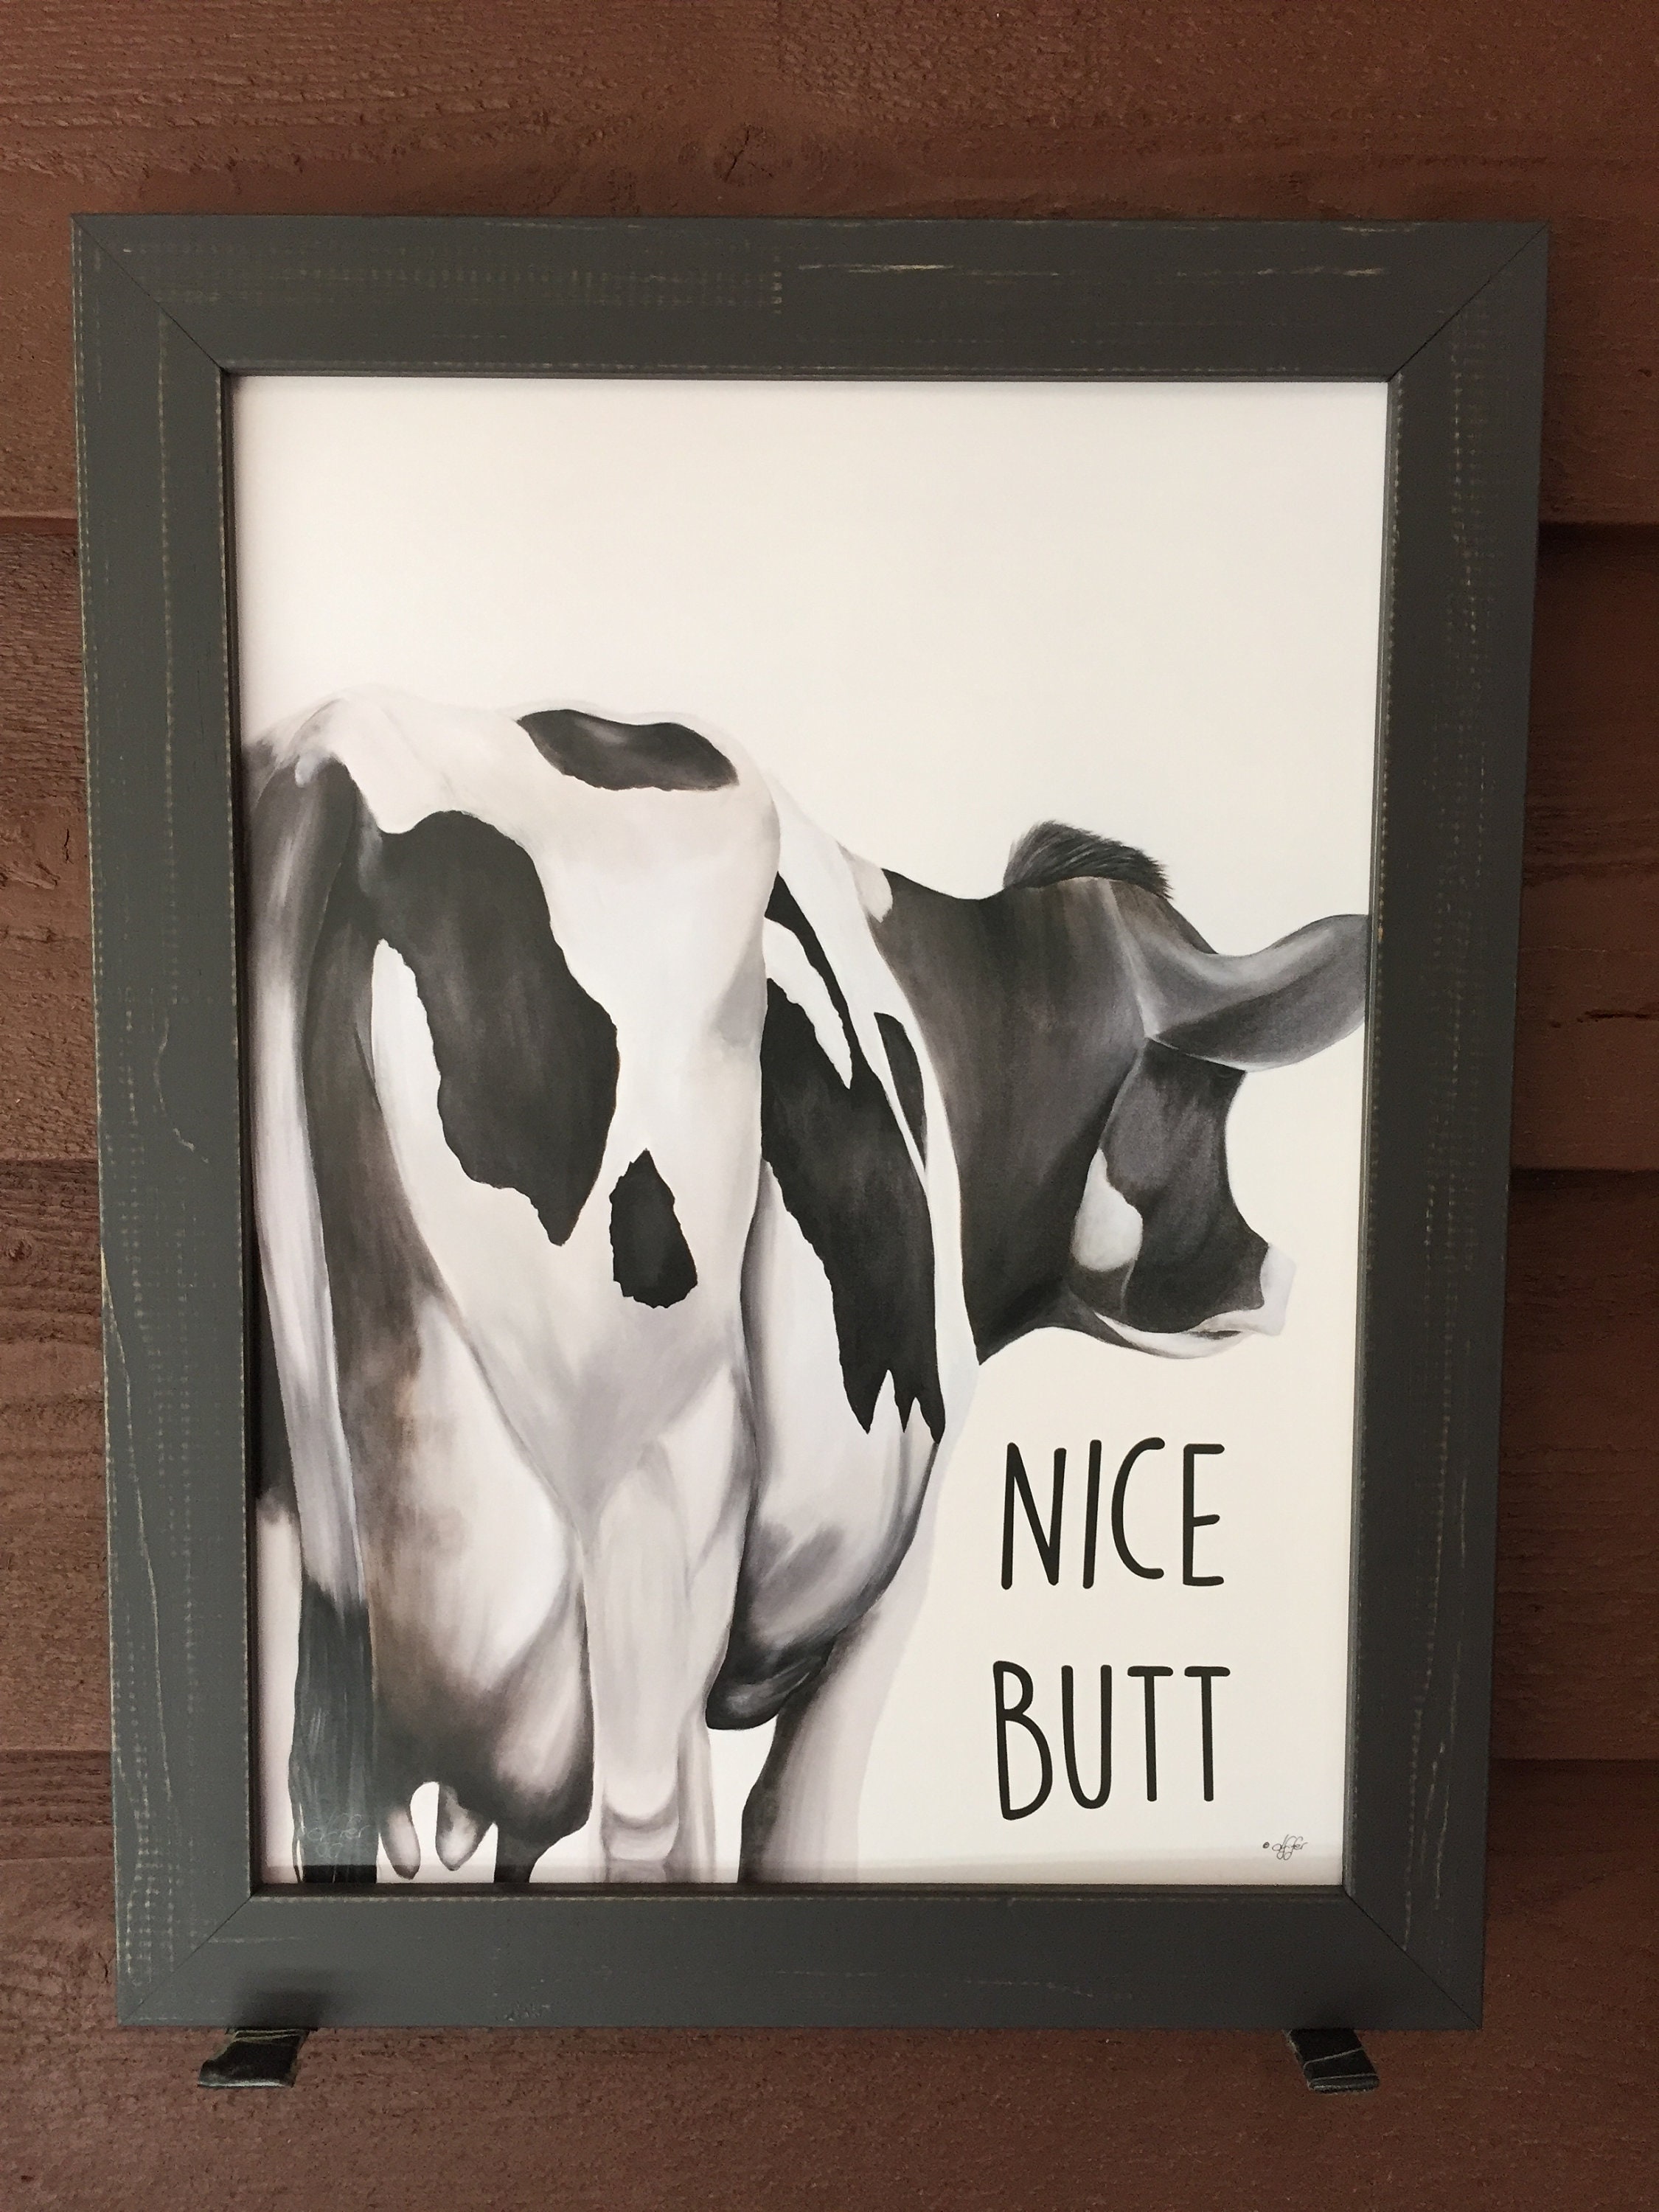 Cute Funny Cow Framed Picture nice Butt Bathroom photo